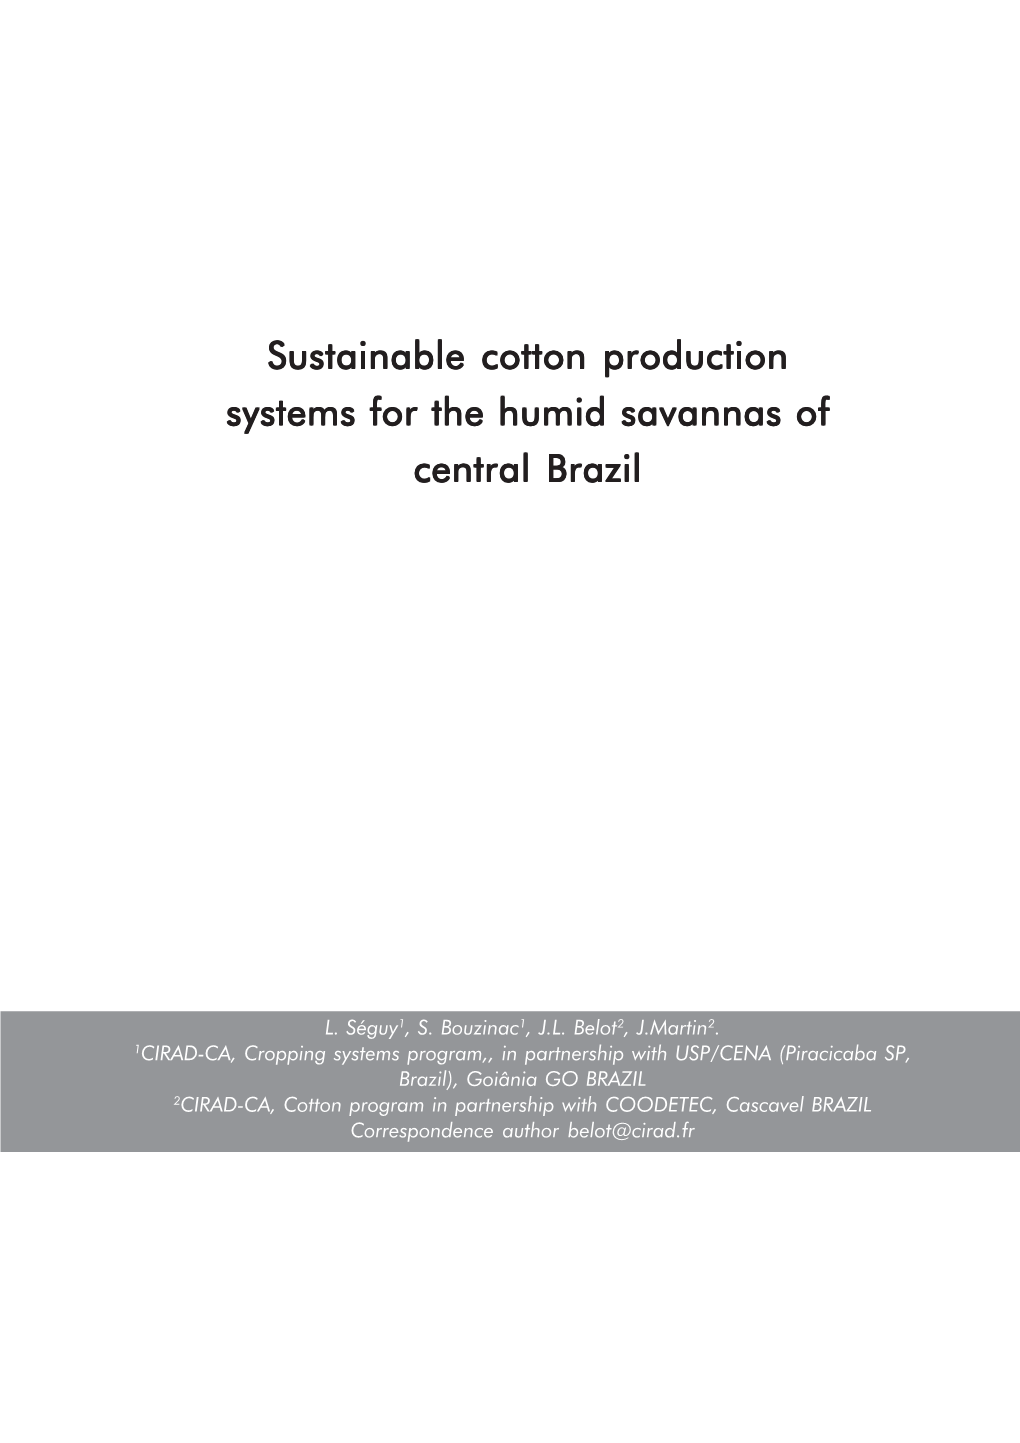 Sustainable Cotton Production Systems for the Humid Savannas of Central Brazil